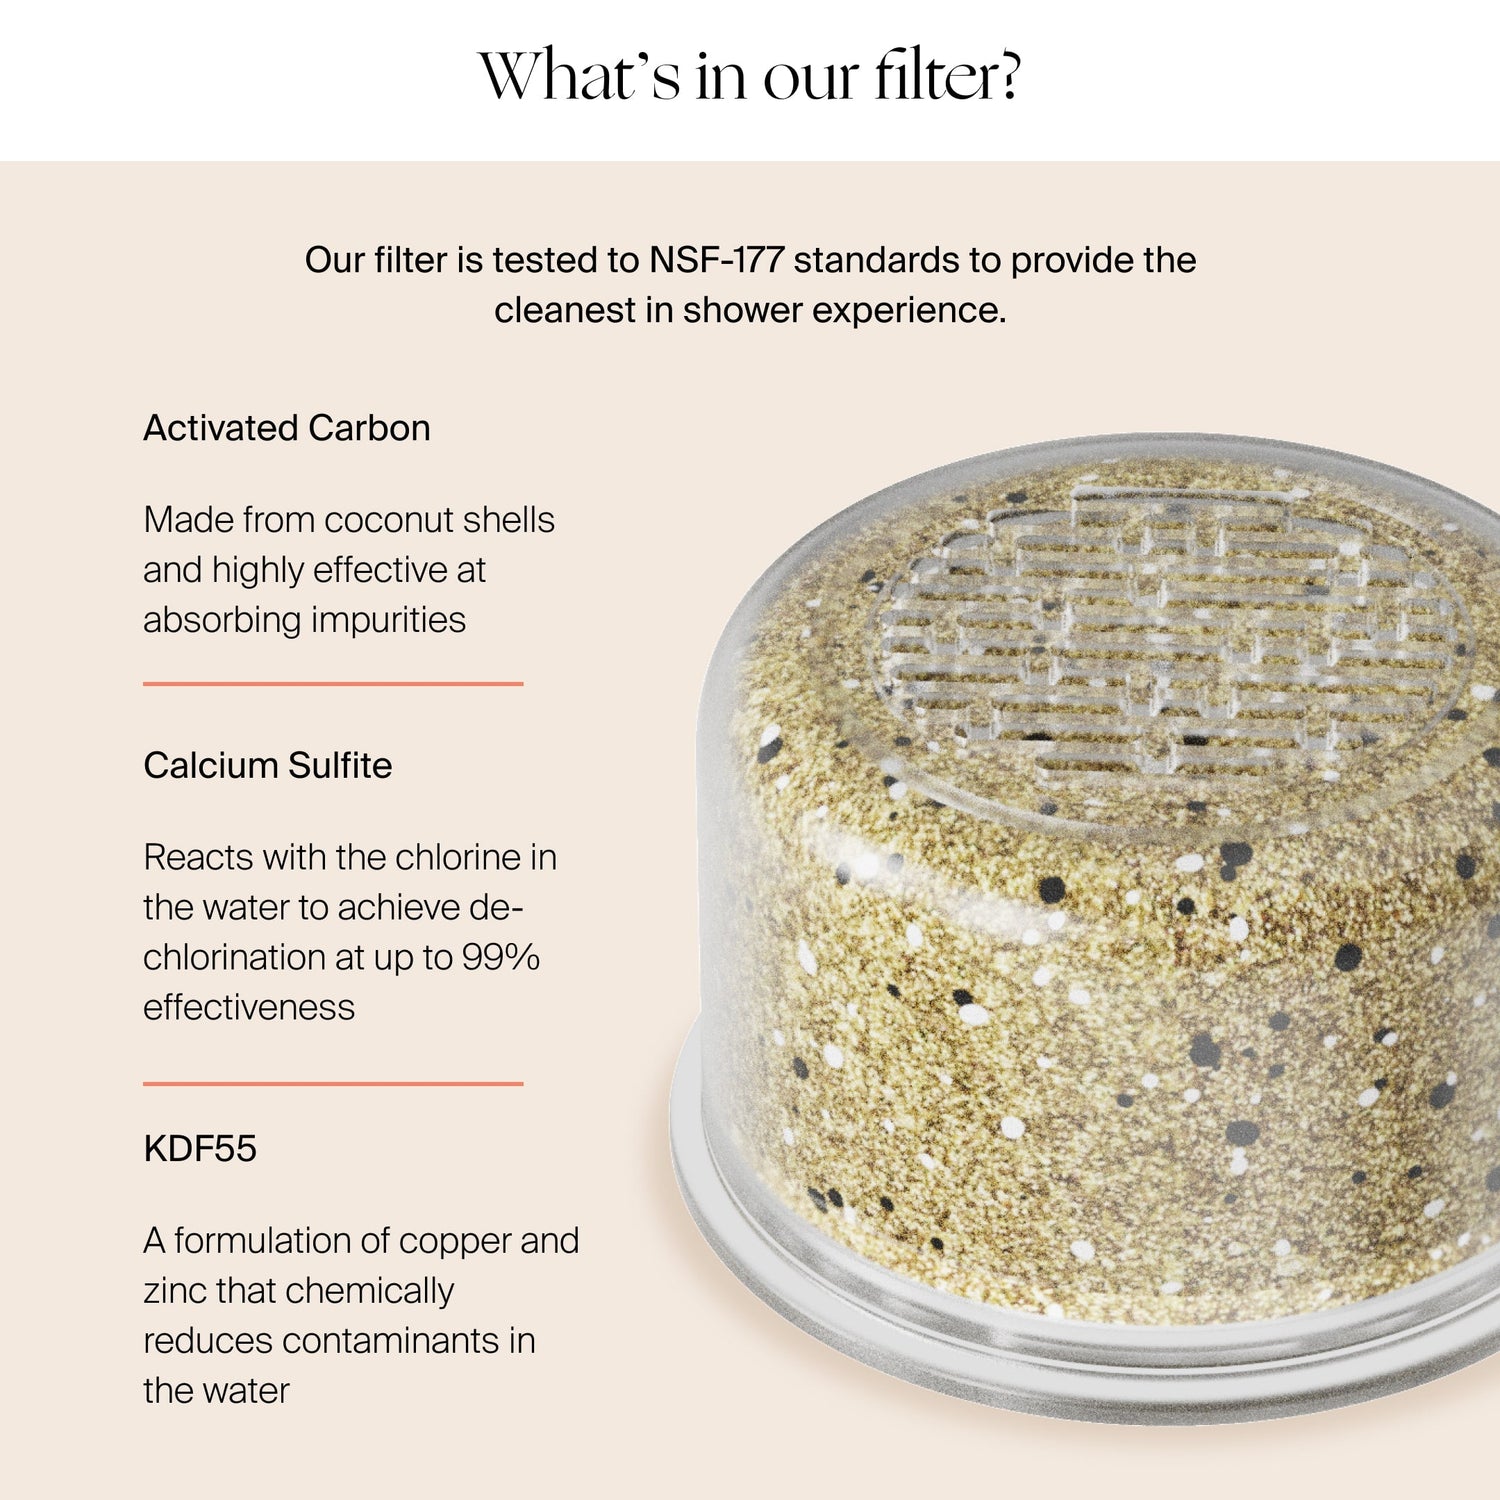 Filtered Showerhead | Lifestyle, What's in our filter?